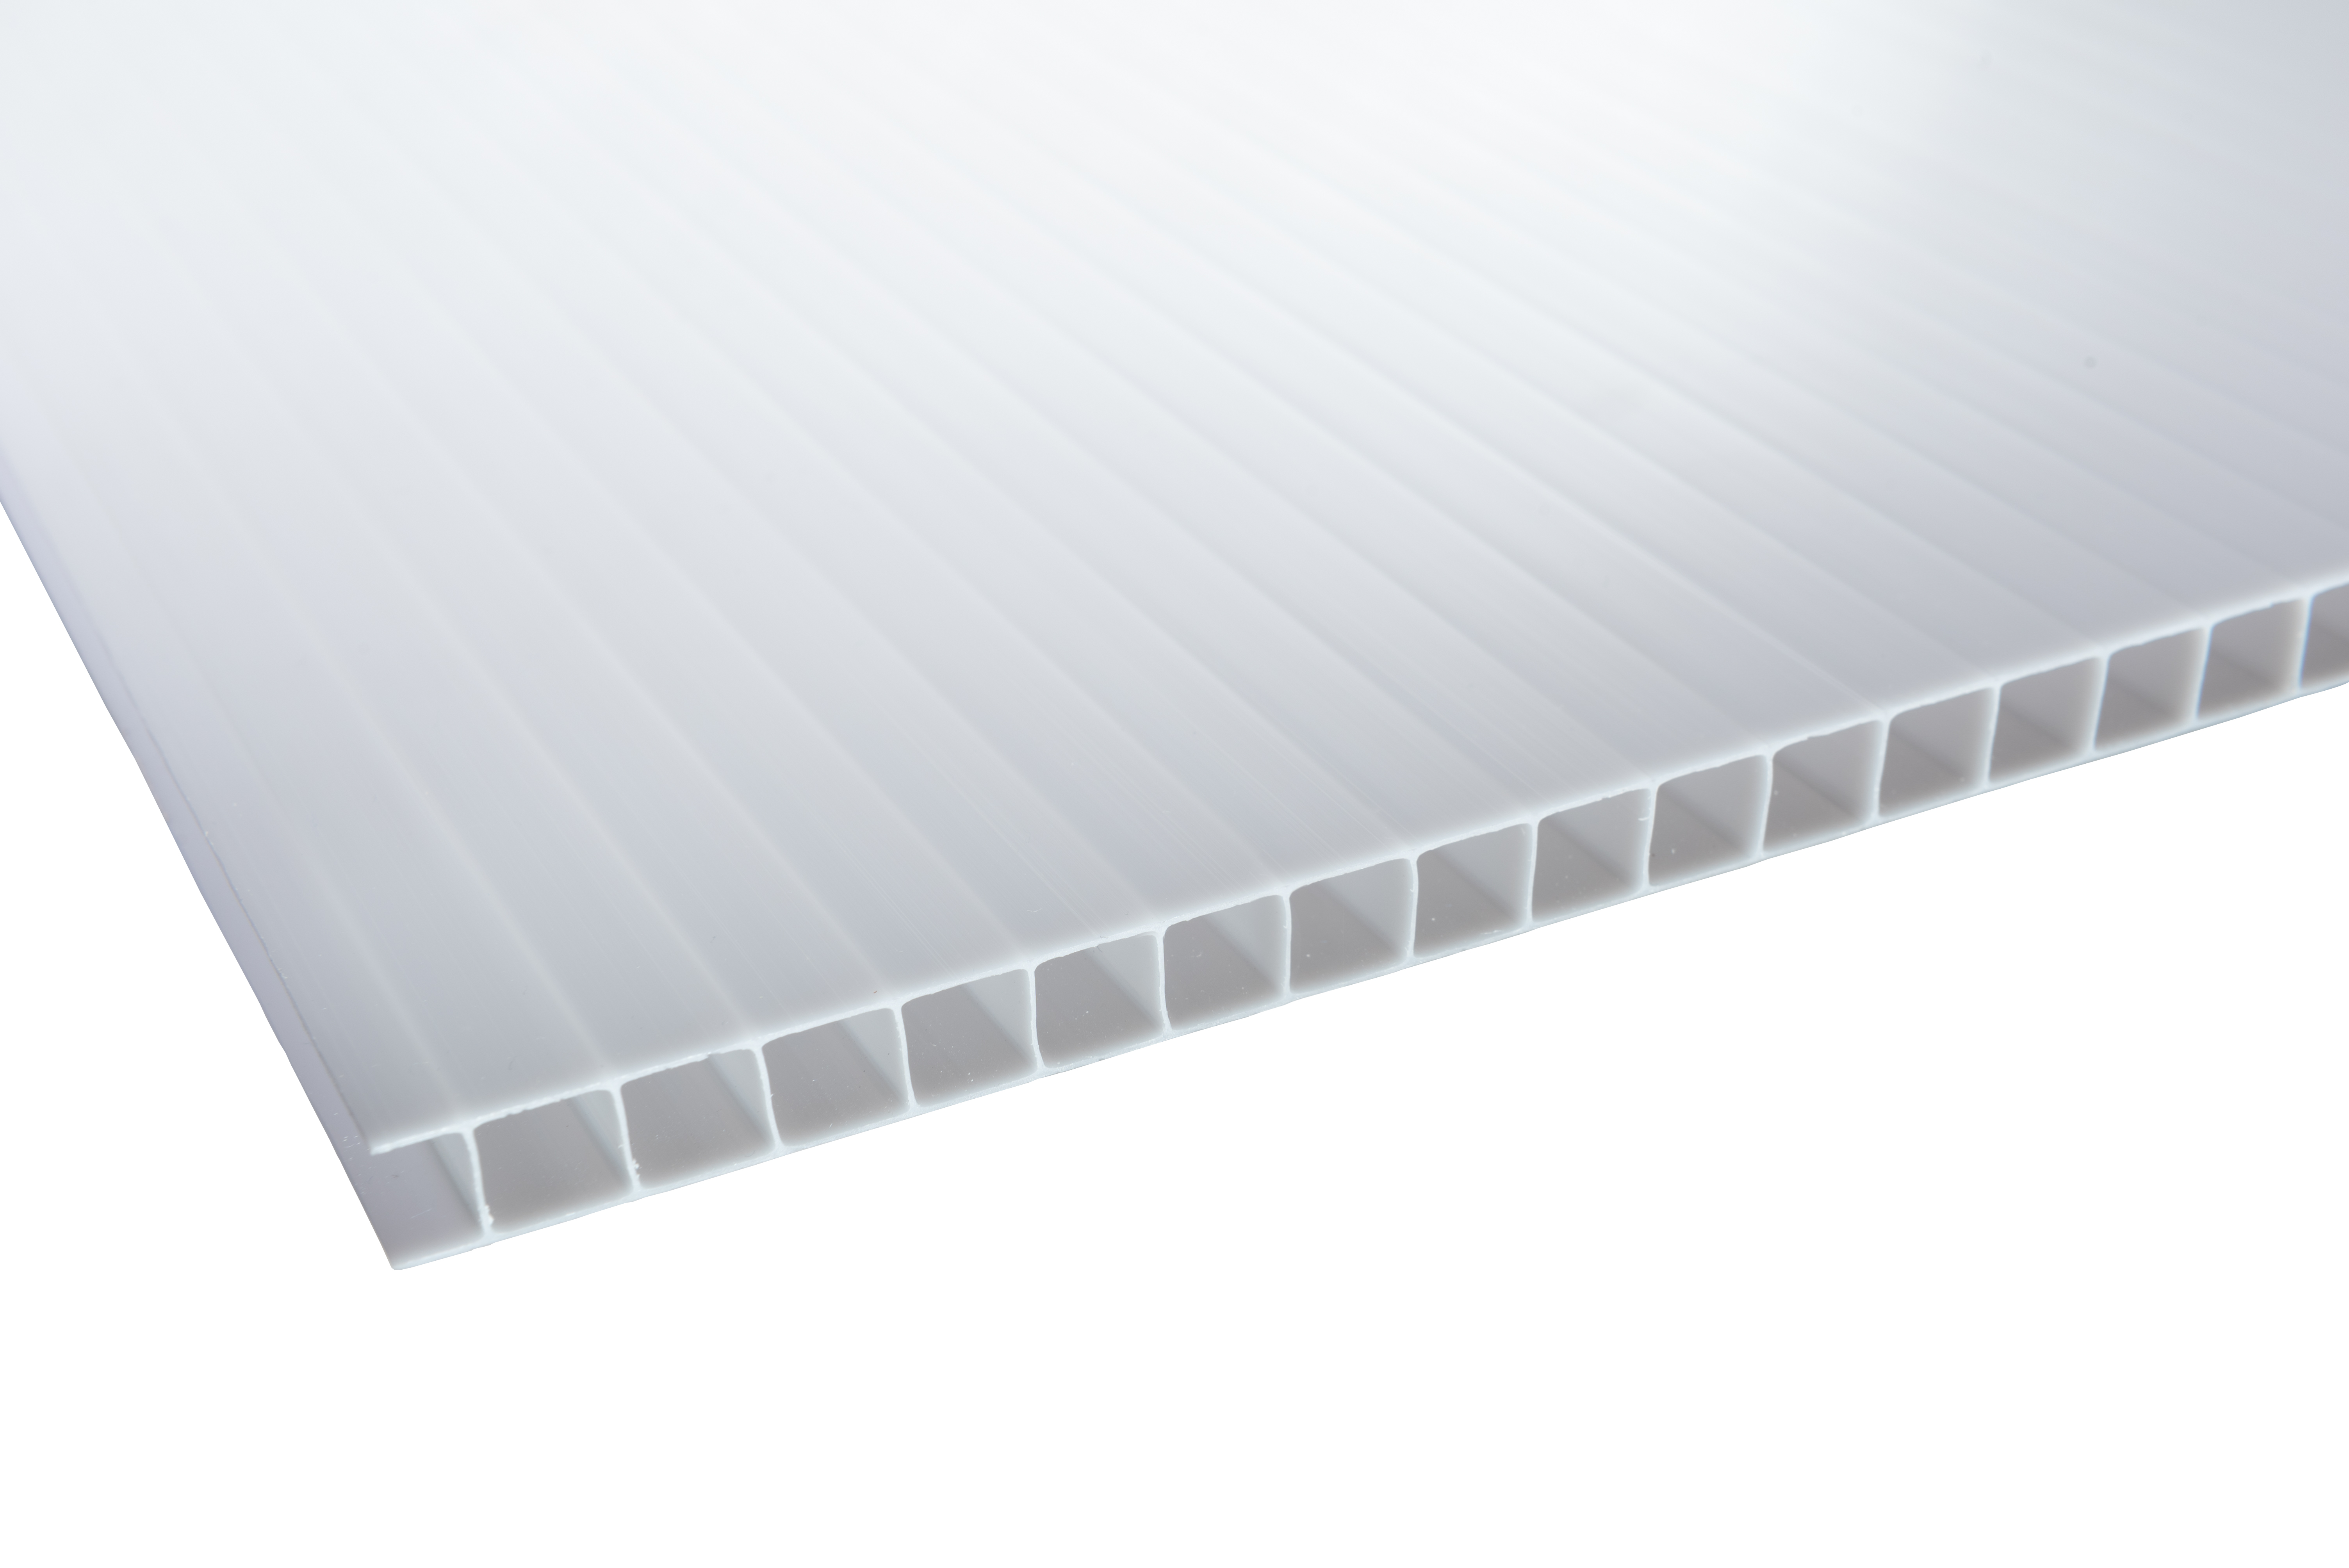 Image of 10mm Opal Multiwall Polycarbonate Sheet - 2500 x 2100mm